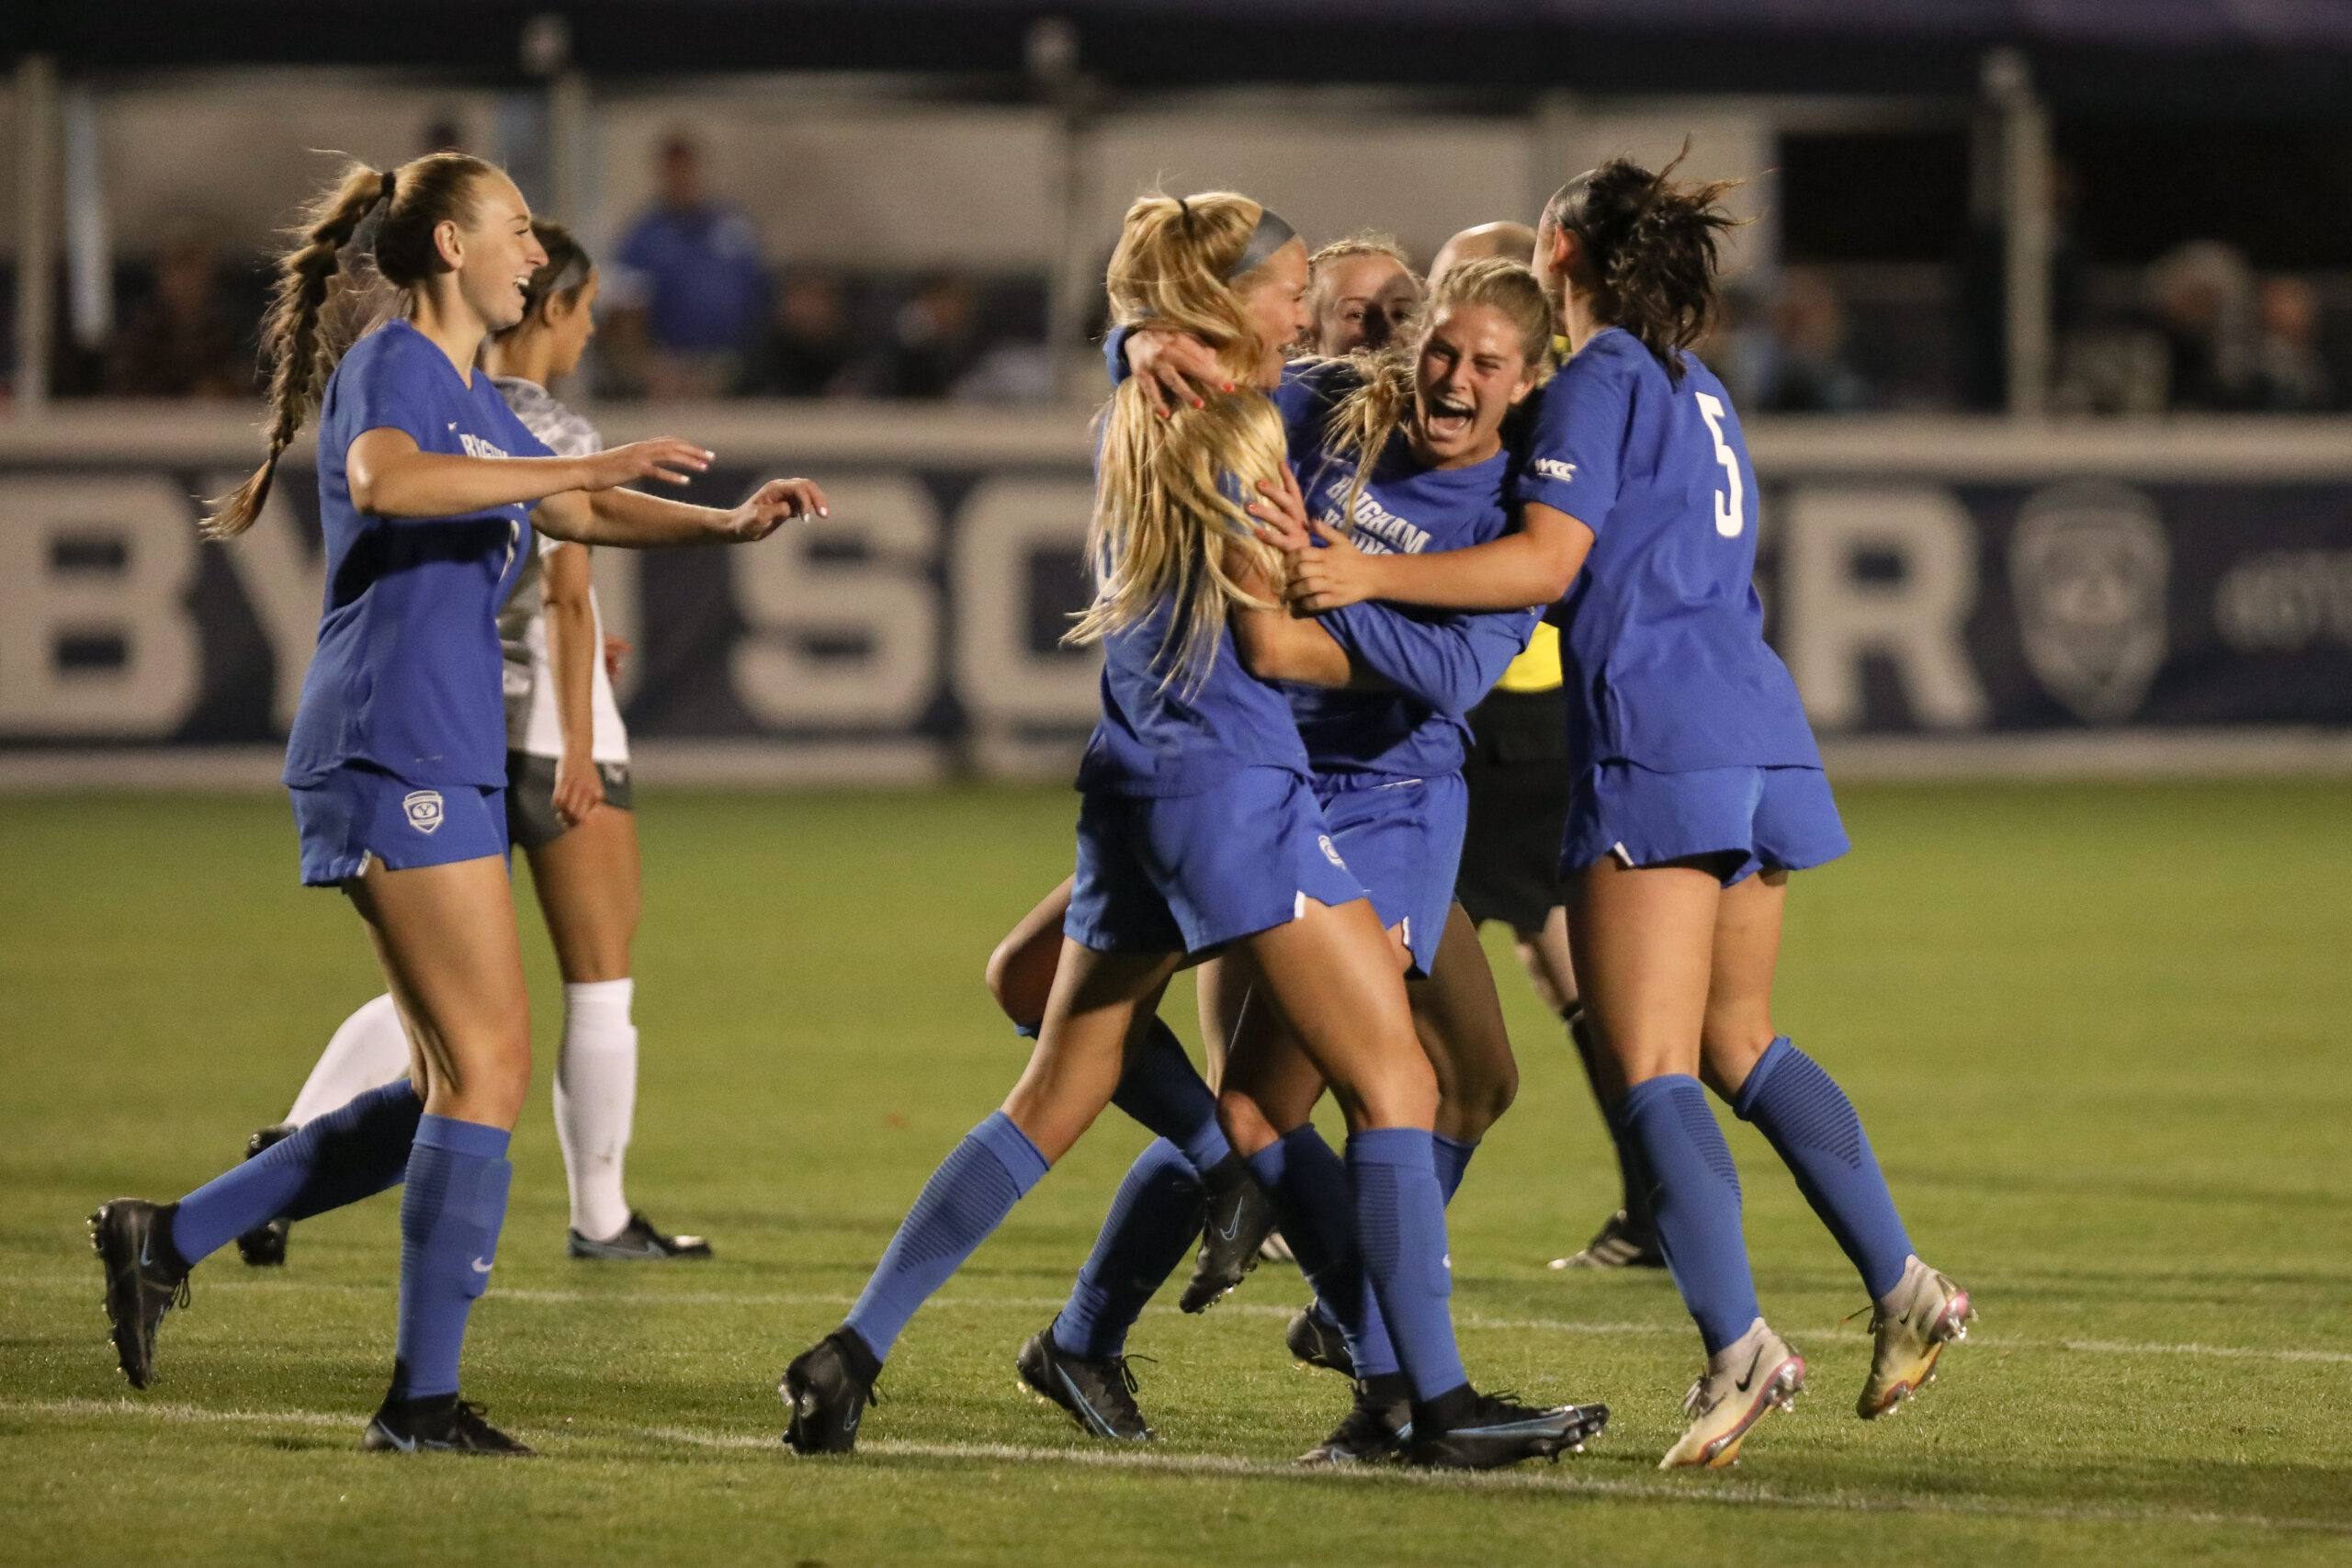 BYU women's soccer shuts out Ohio State 3-0 in season opener